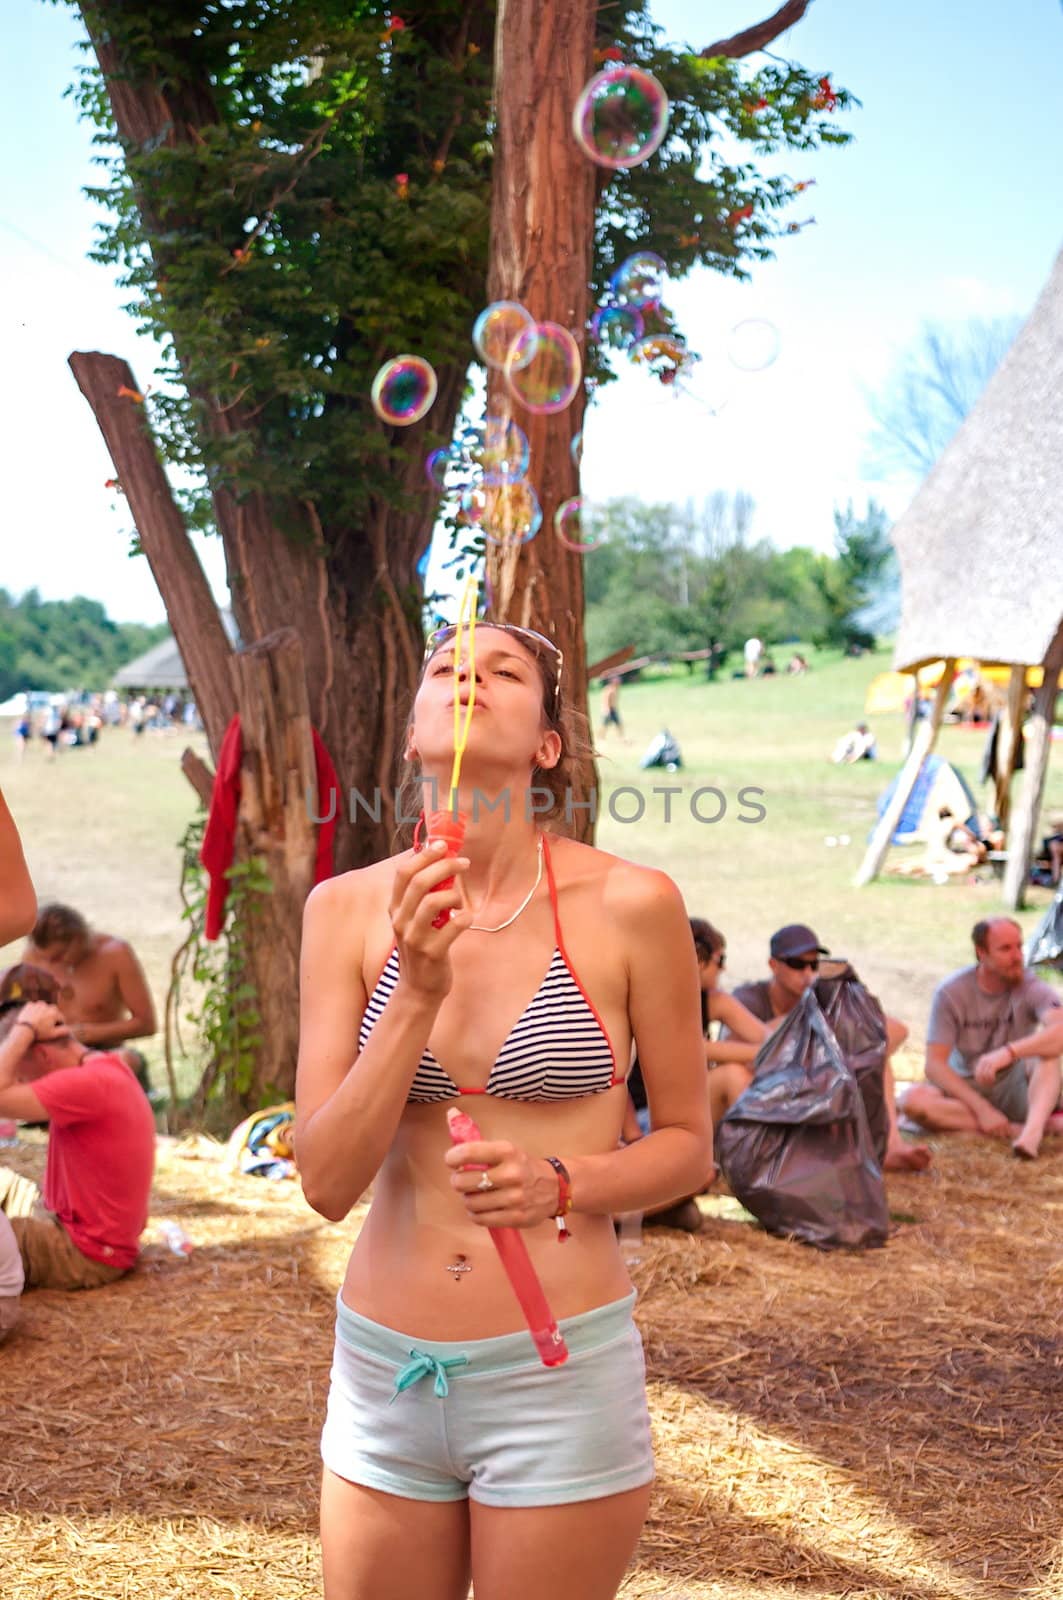 OZORA, HUNGARY - AUGUST 01: Girl blowing bubles on Ozora Festiva by anderm